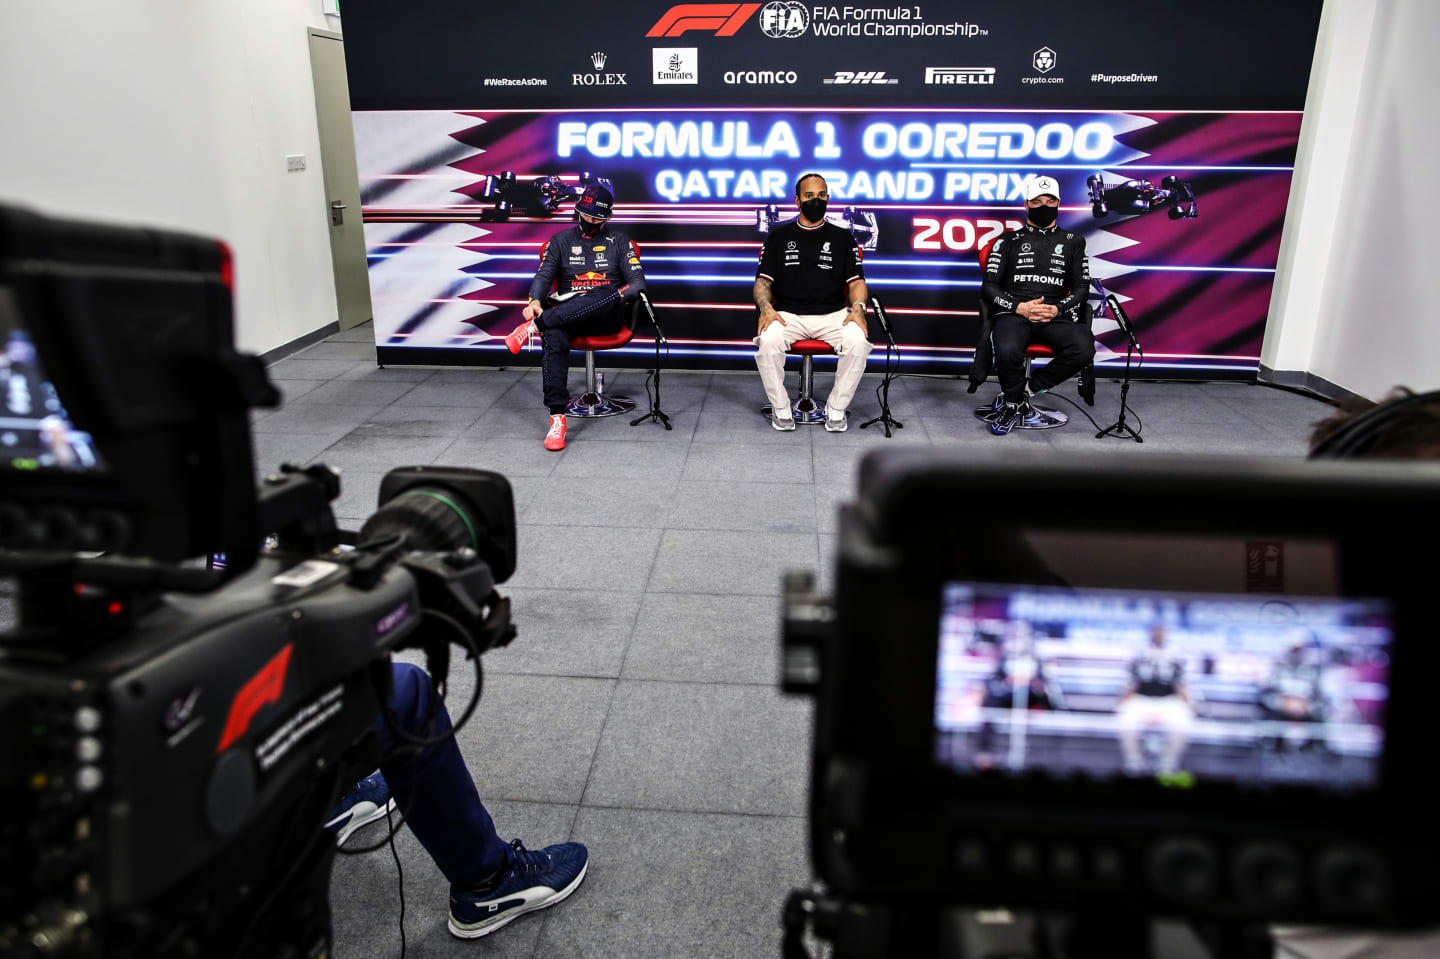 DOHA, QATAR - NOVEMBER 20: Pole position qualifier Lewis Hamilton of Great Britain and Mercedes GP, second placed qualifier Max Verstappen of Netherlands and Red Bull Racing and third placed qualifier Valtteri Bottas of Finland and Mercedes GP talk in a press conference after qualifying ahead of the F1 Grand Prix of Qatar at Losail International Circuit on November 20, 2021 in Doha, Qatar. (Photo by Florent Gooden - Pool/Getty Images)